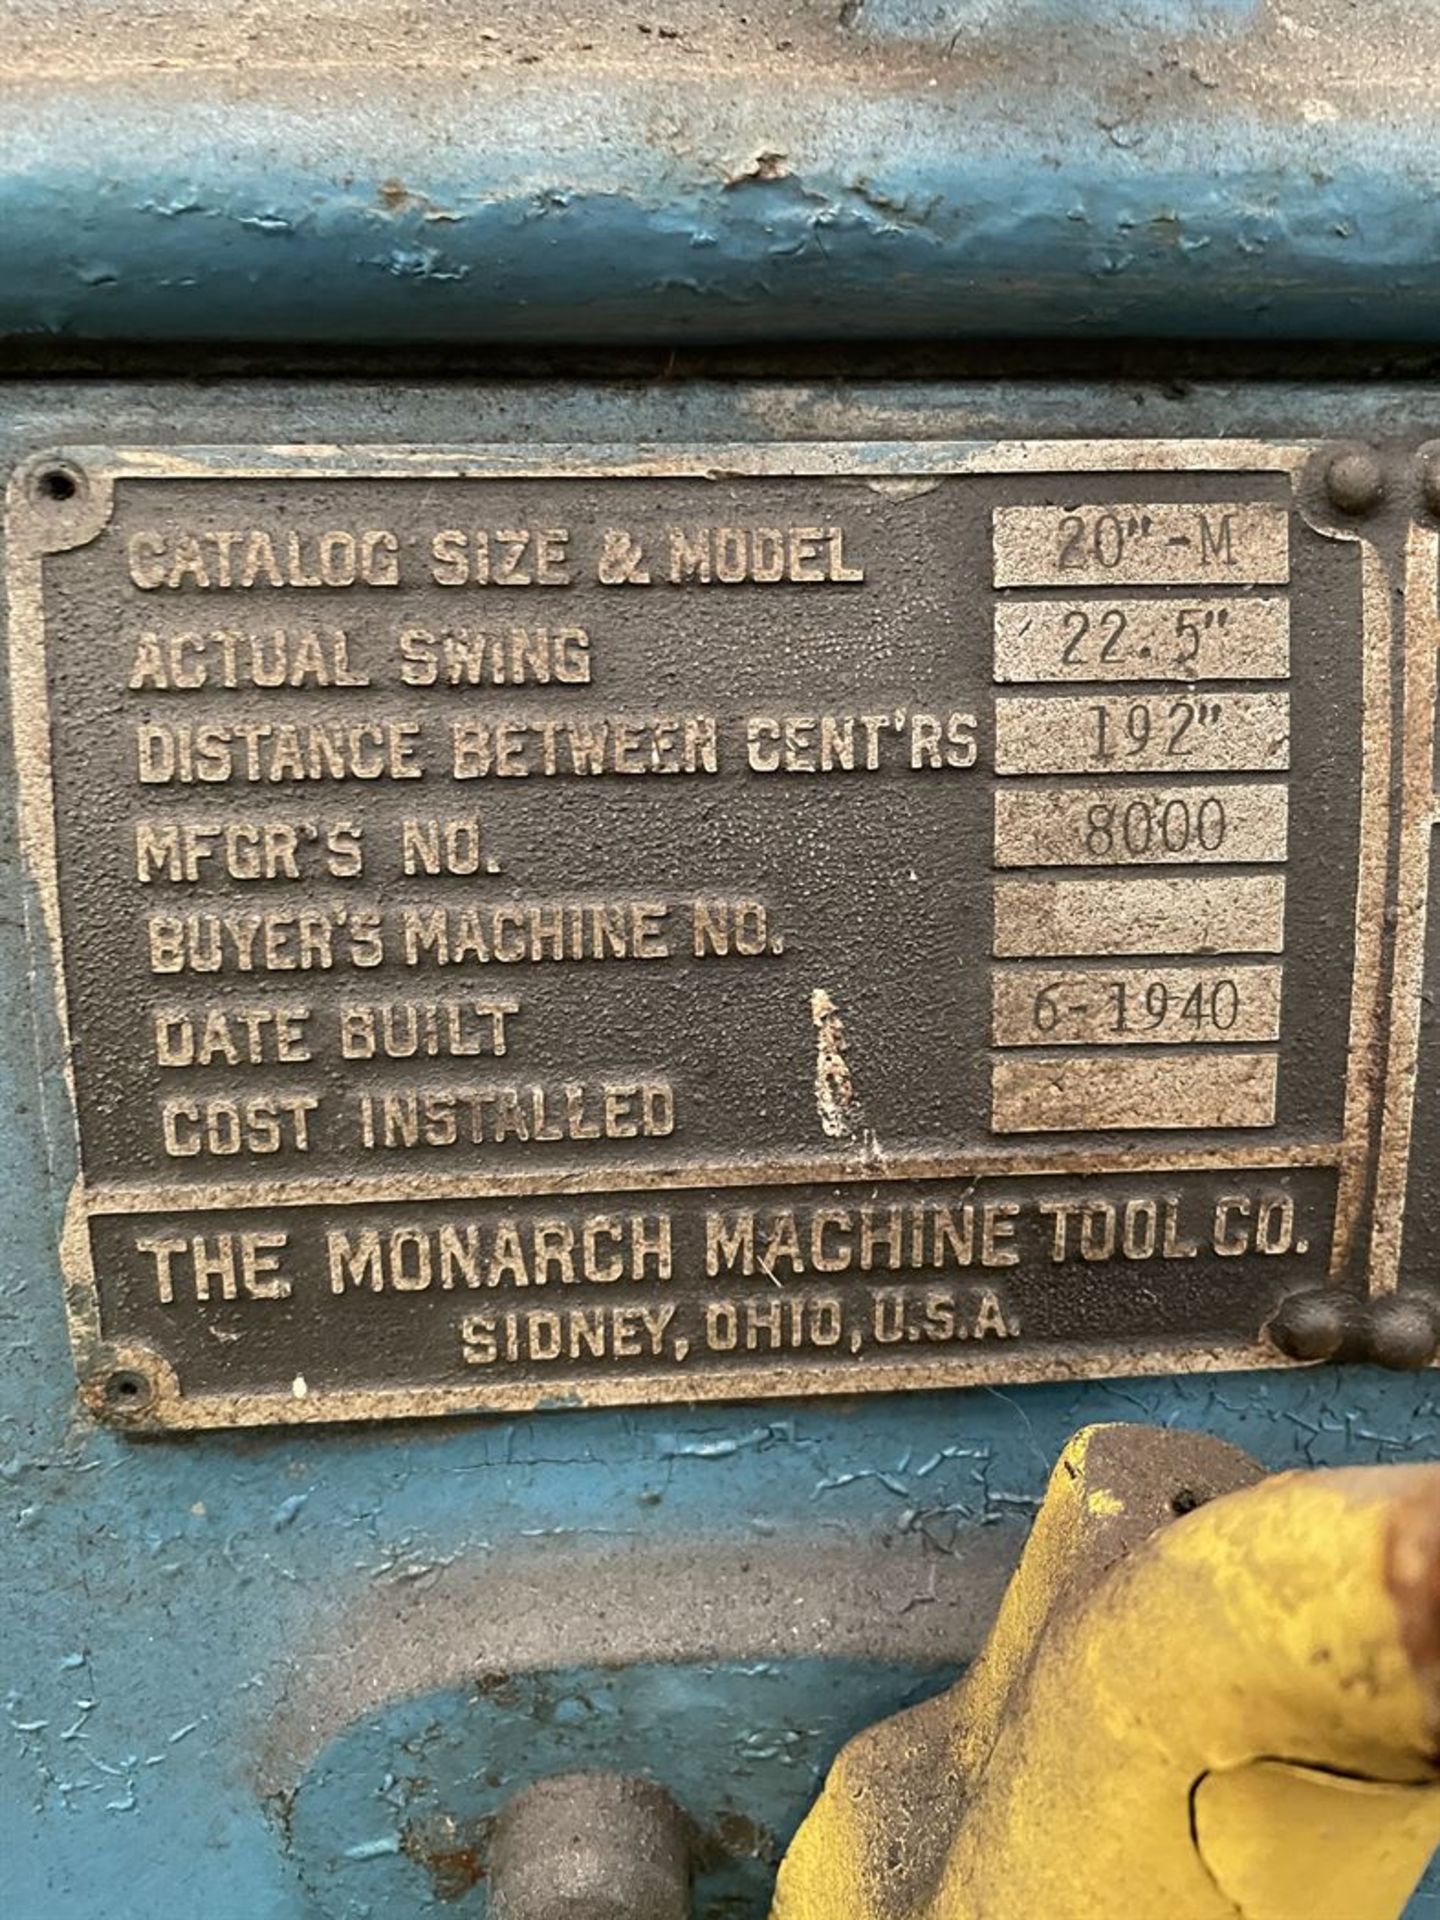 MONARCH 20" x 192" Engine Lathe, s/n 8000, 22.5" Swing Over Bed, 192" Distance Between Centers, 9- - Image 4 of 4